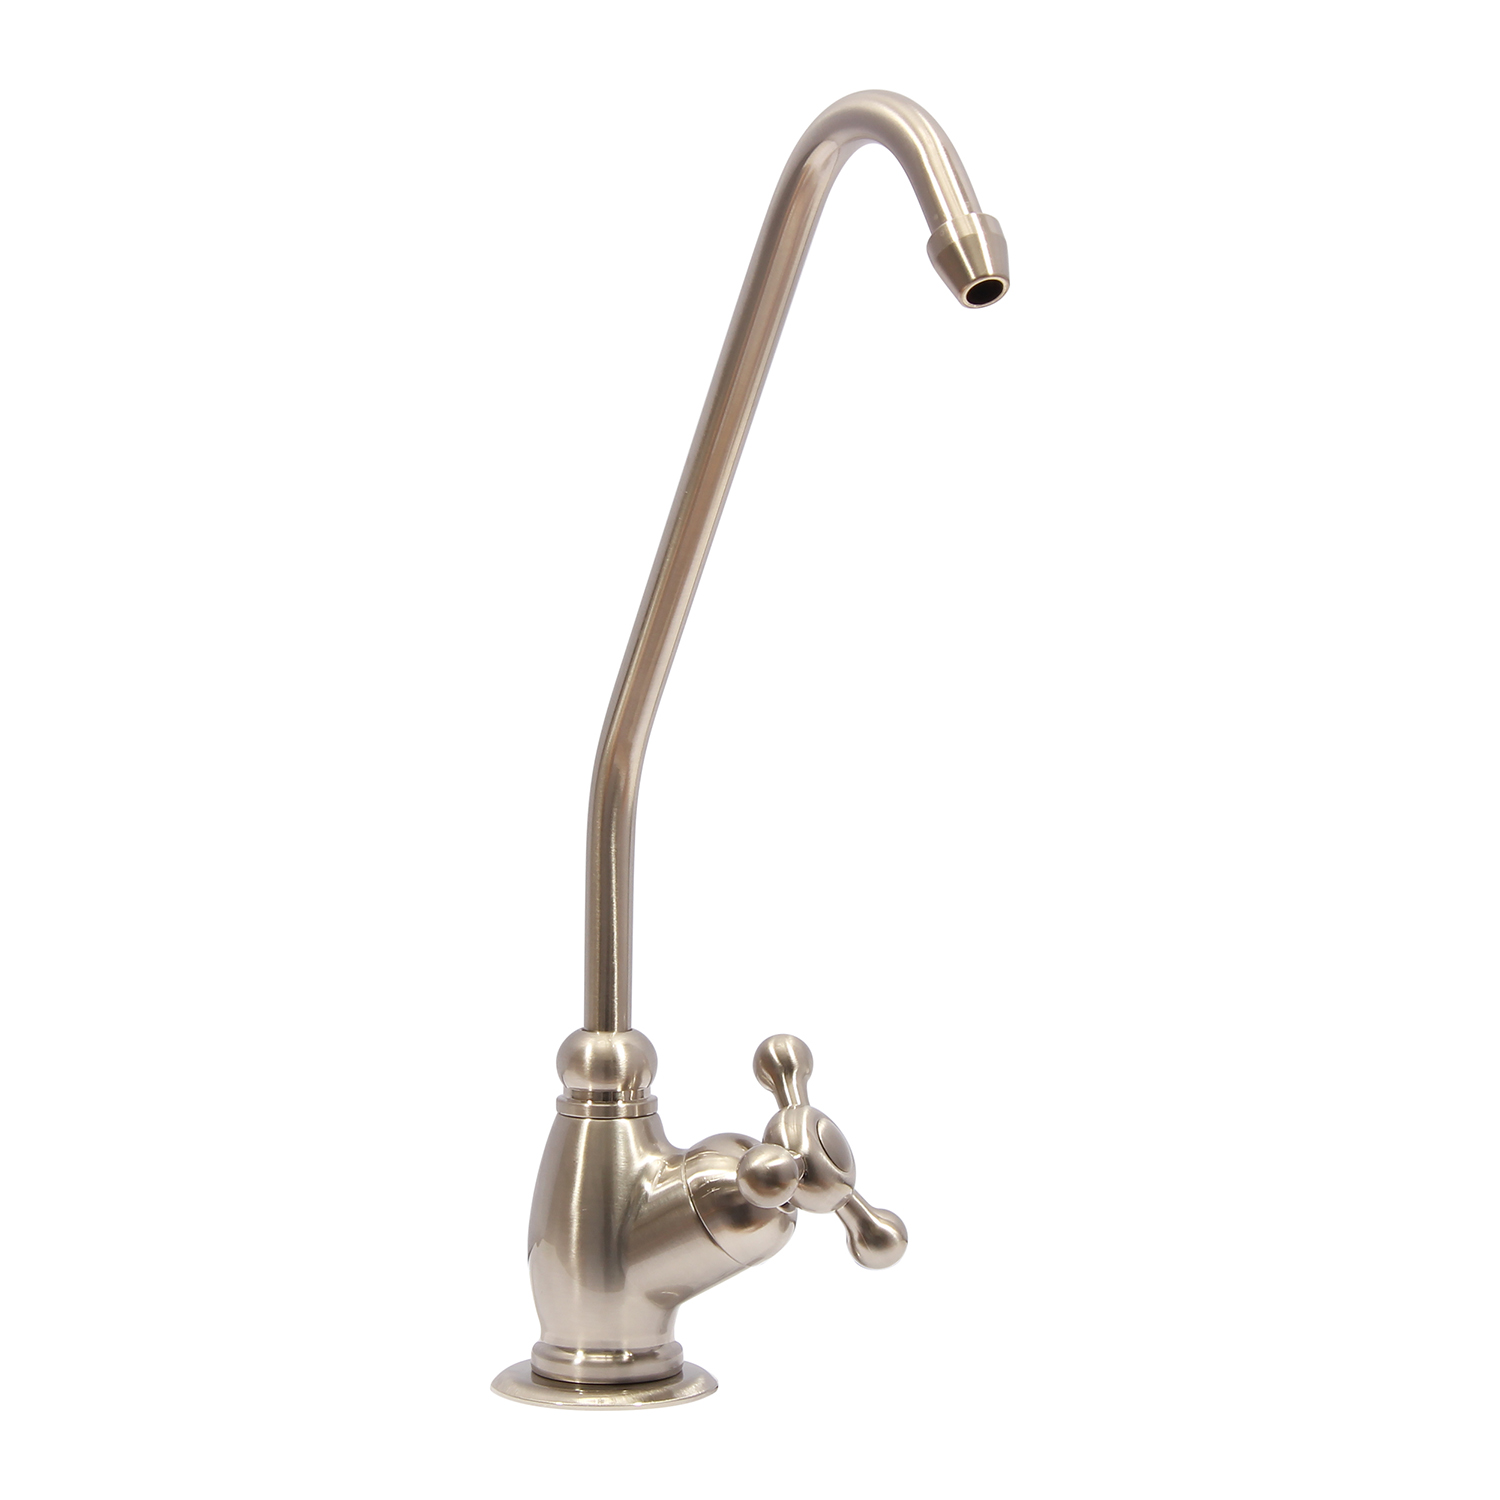 Dyconn Faucet DYRO633BN Drinking Water Faucet for RO Filtration System 819788012378 eBay